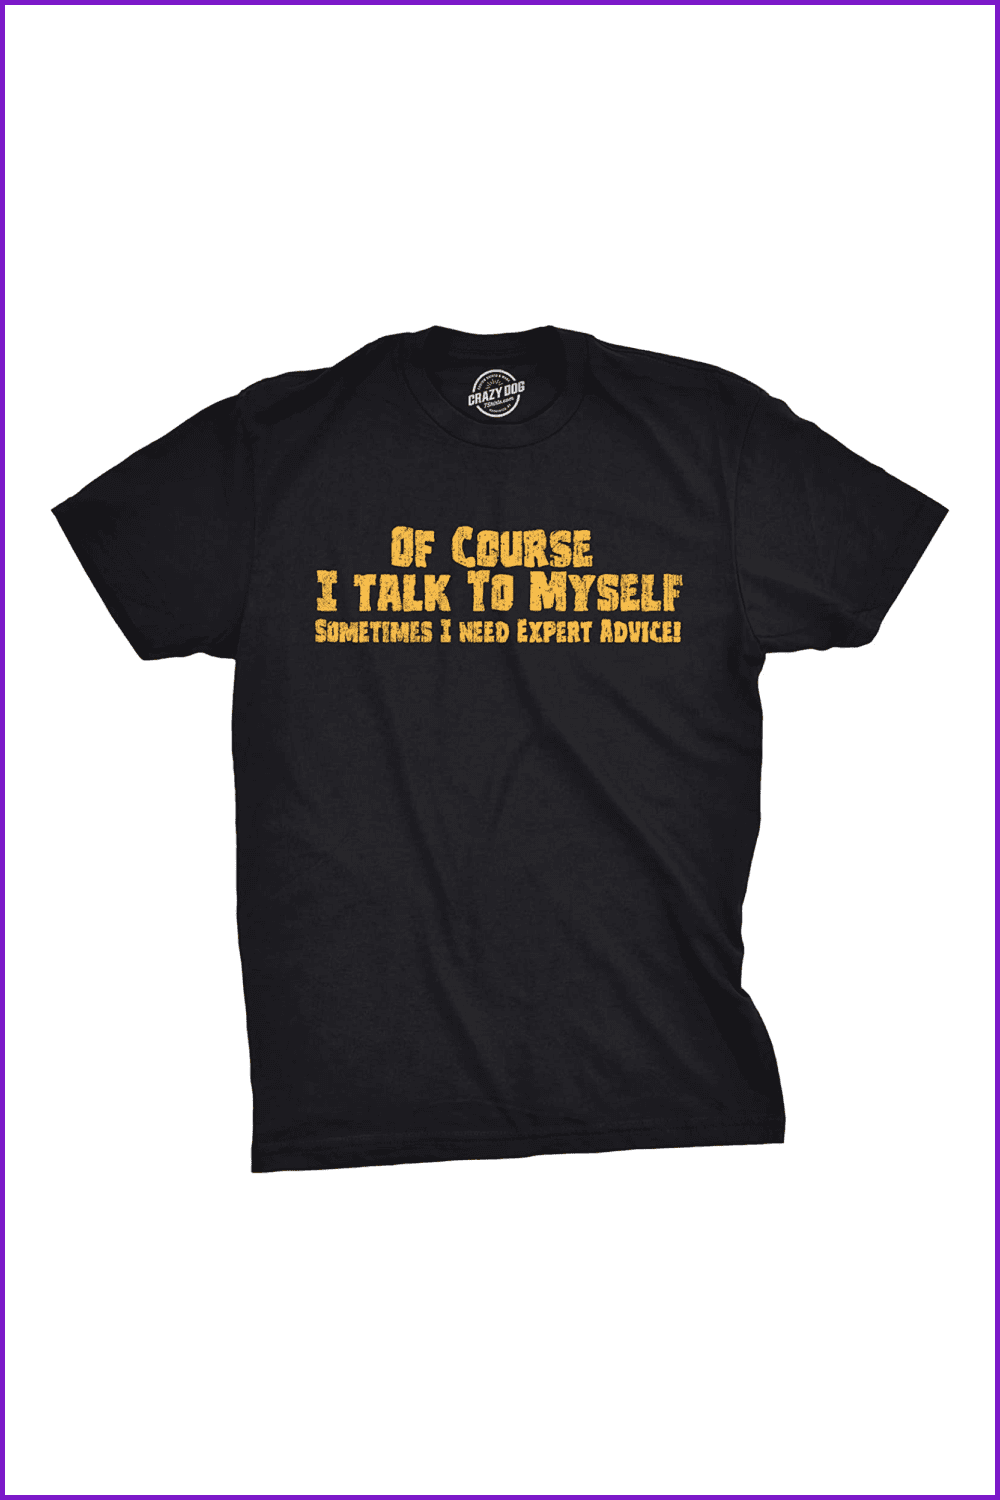 Mens of Course I Talk to Myself Sometimes I Need Expert Advice Funny Sarcasm T Shirt.